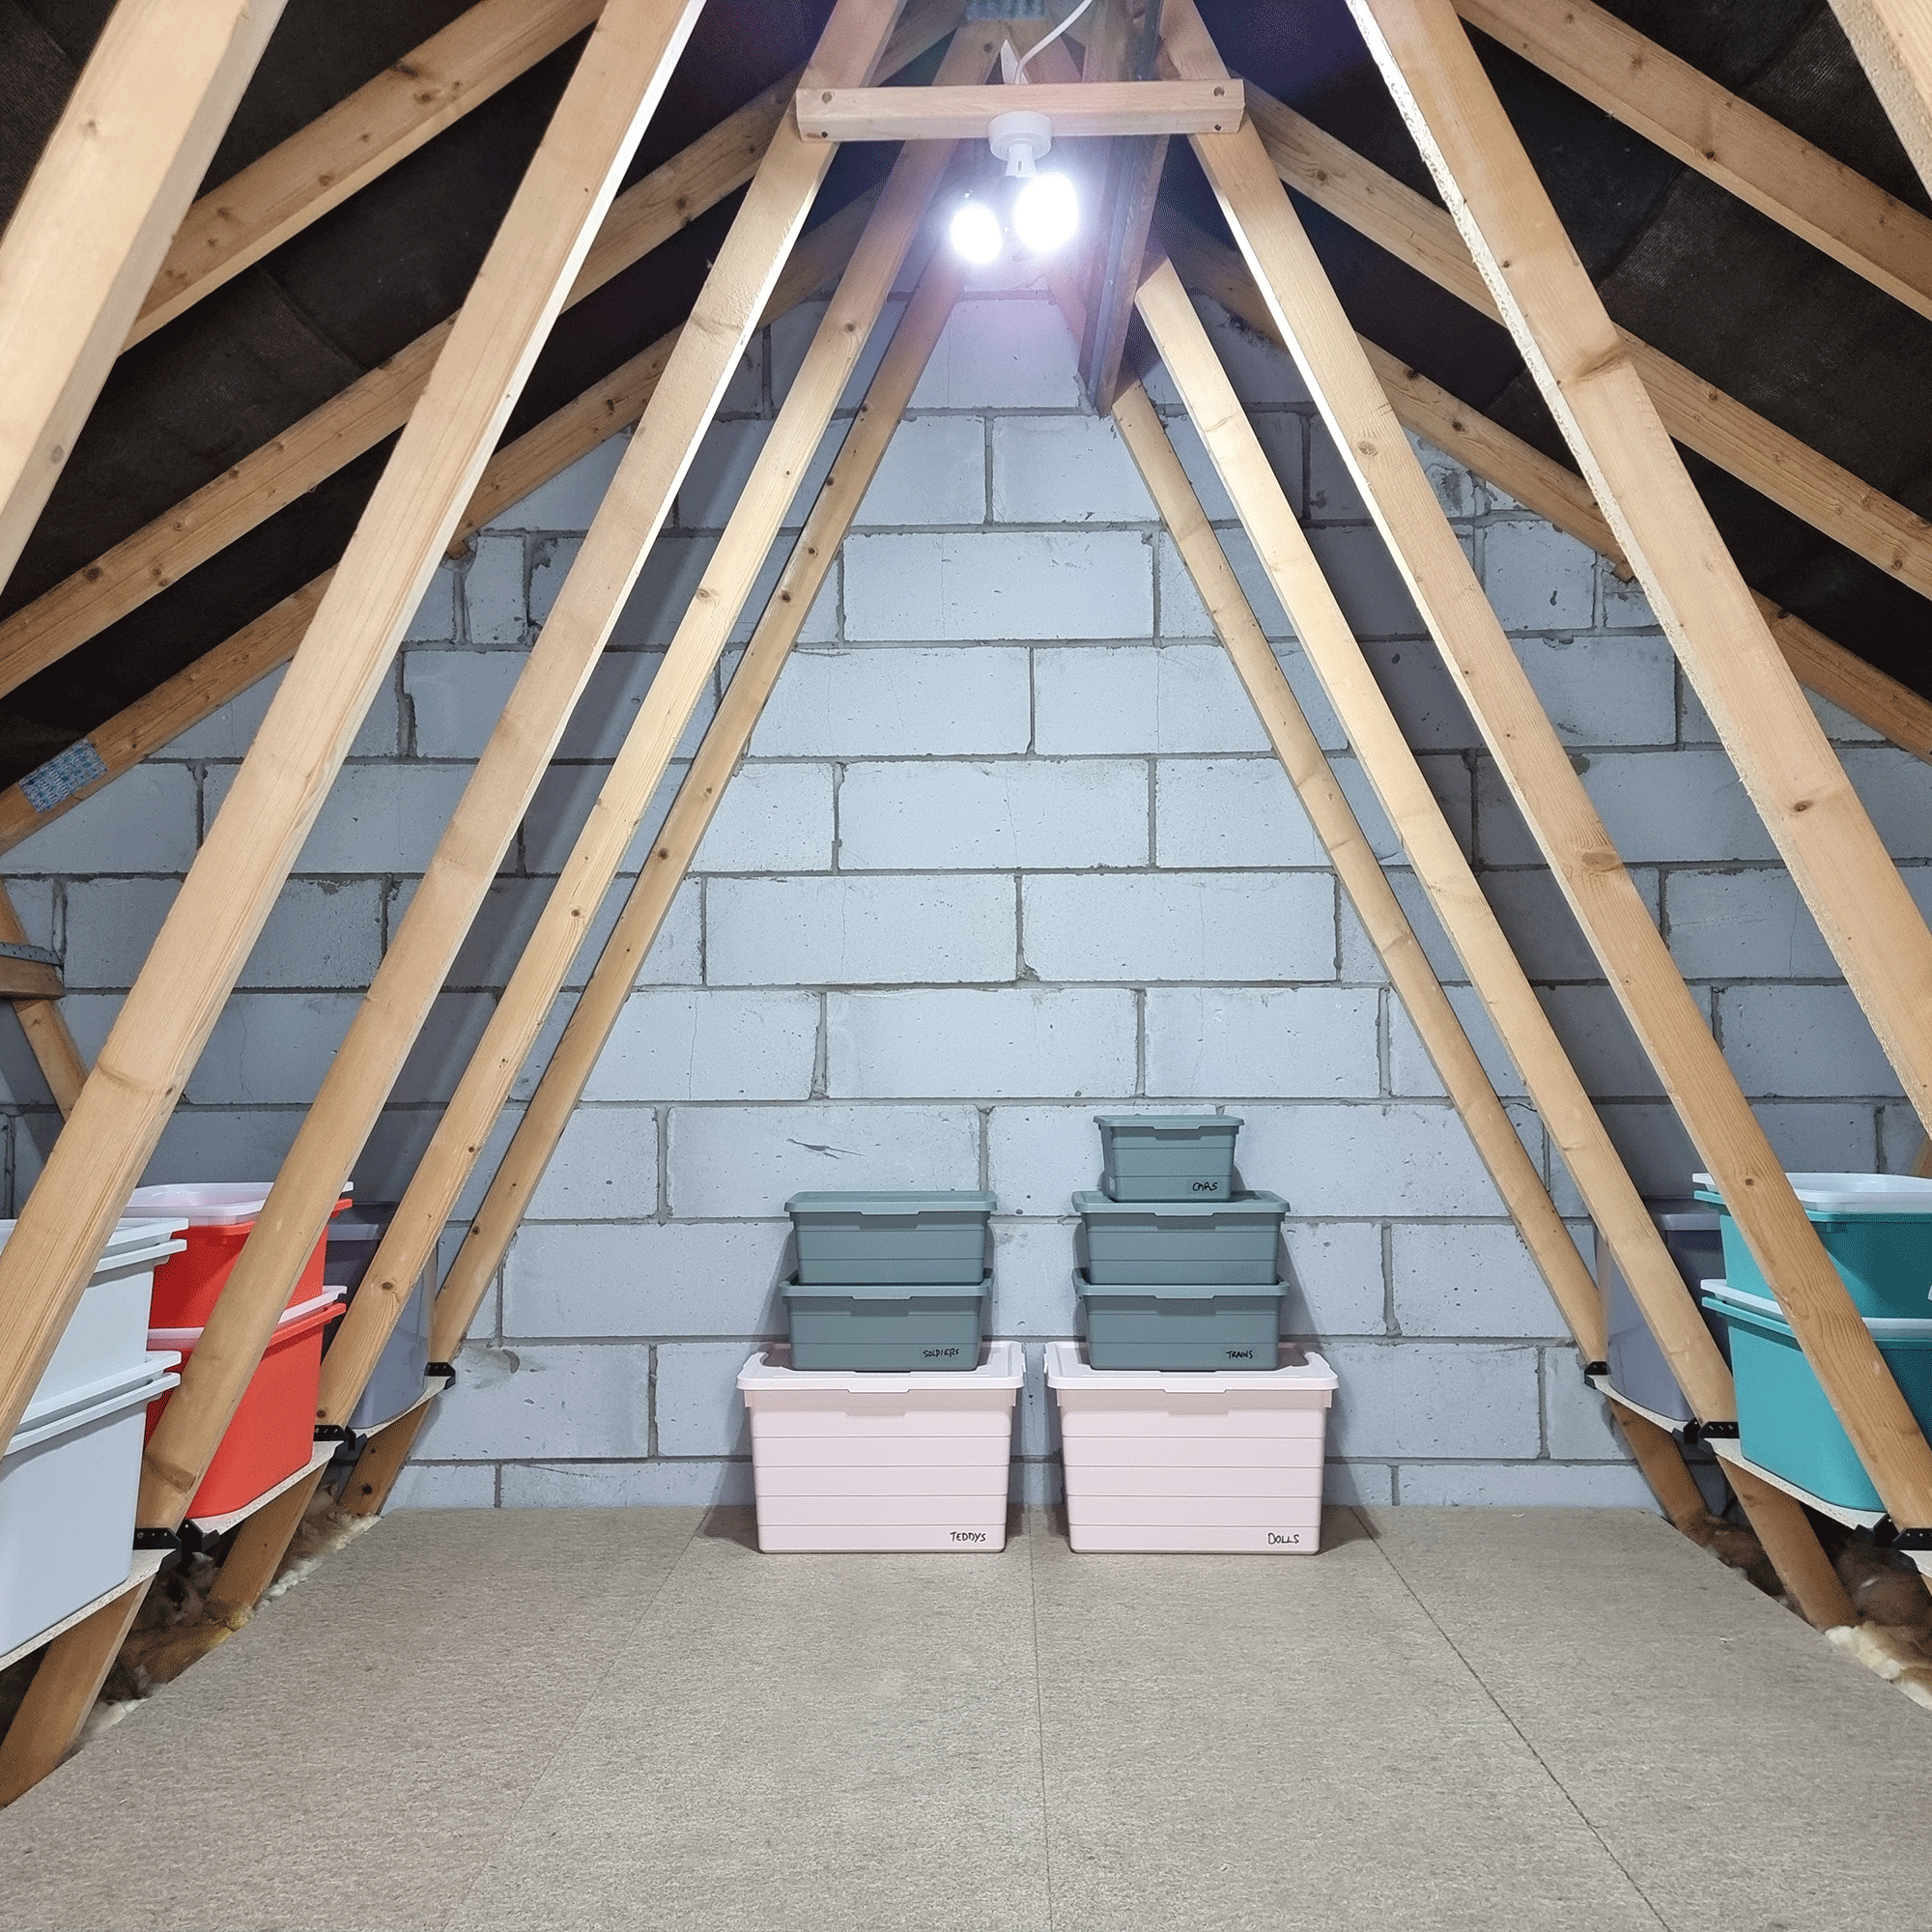 Loft with storage boxes stacked up